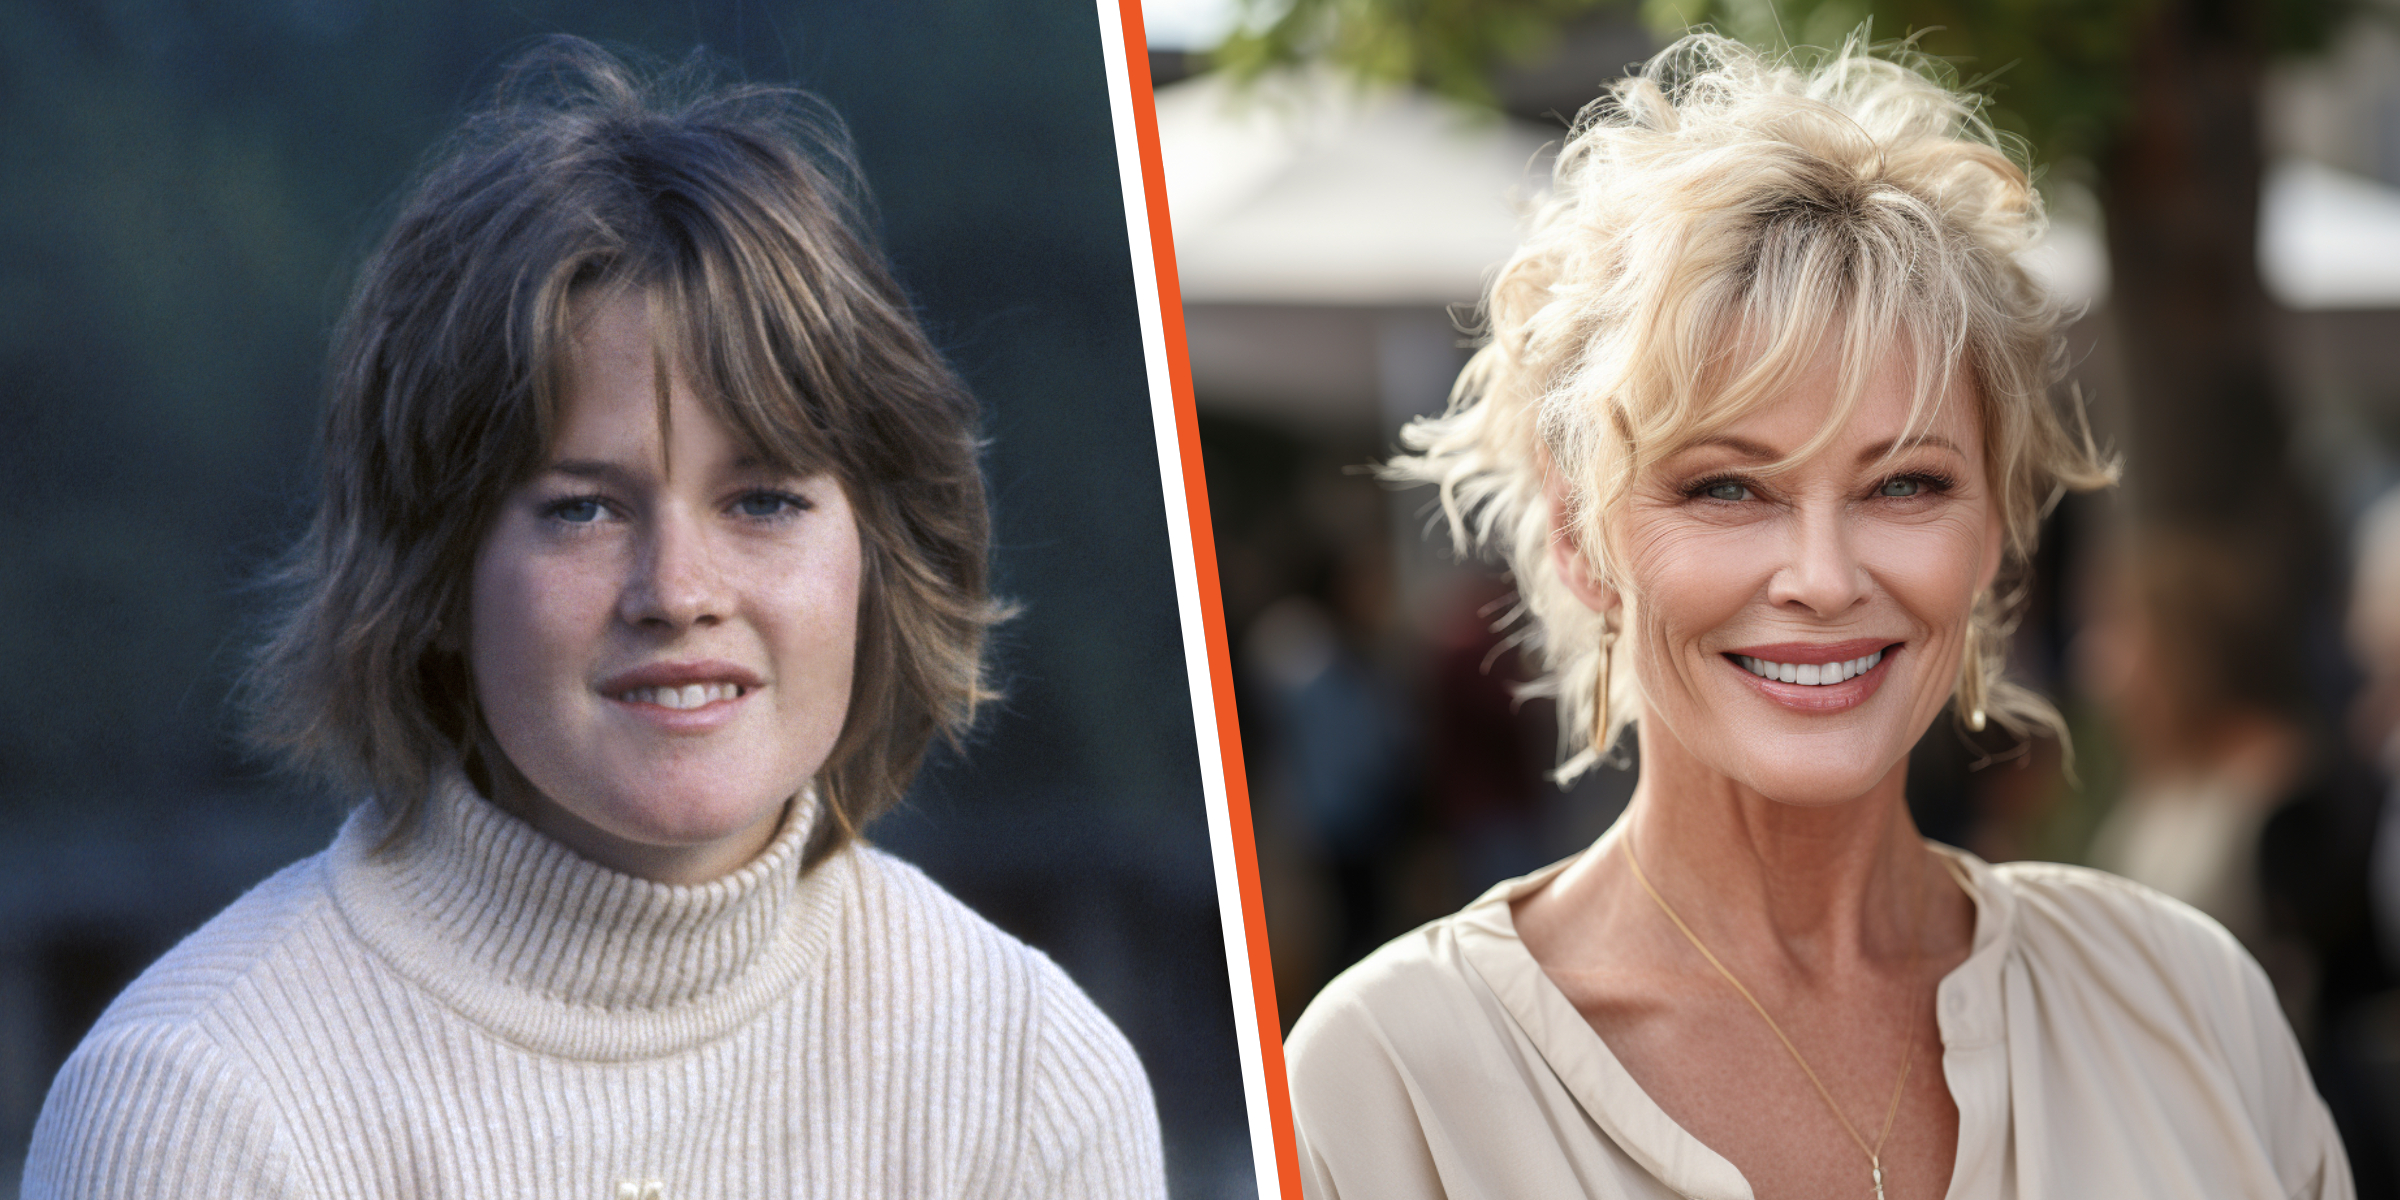 Melanie Griffith | Sources : Getty Images | Midjourney